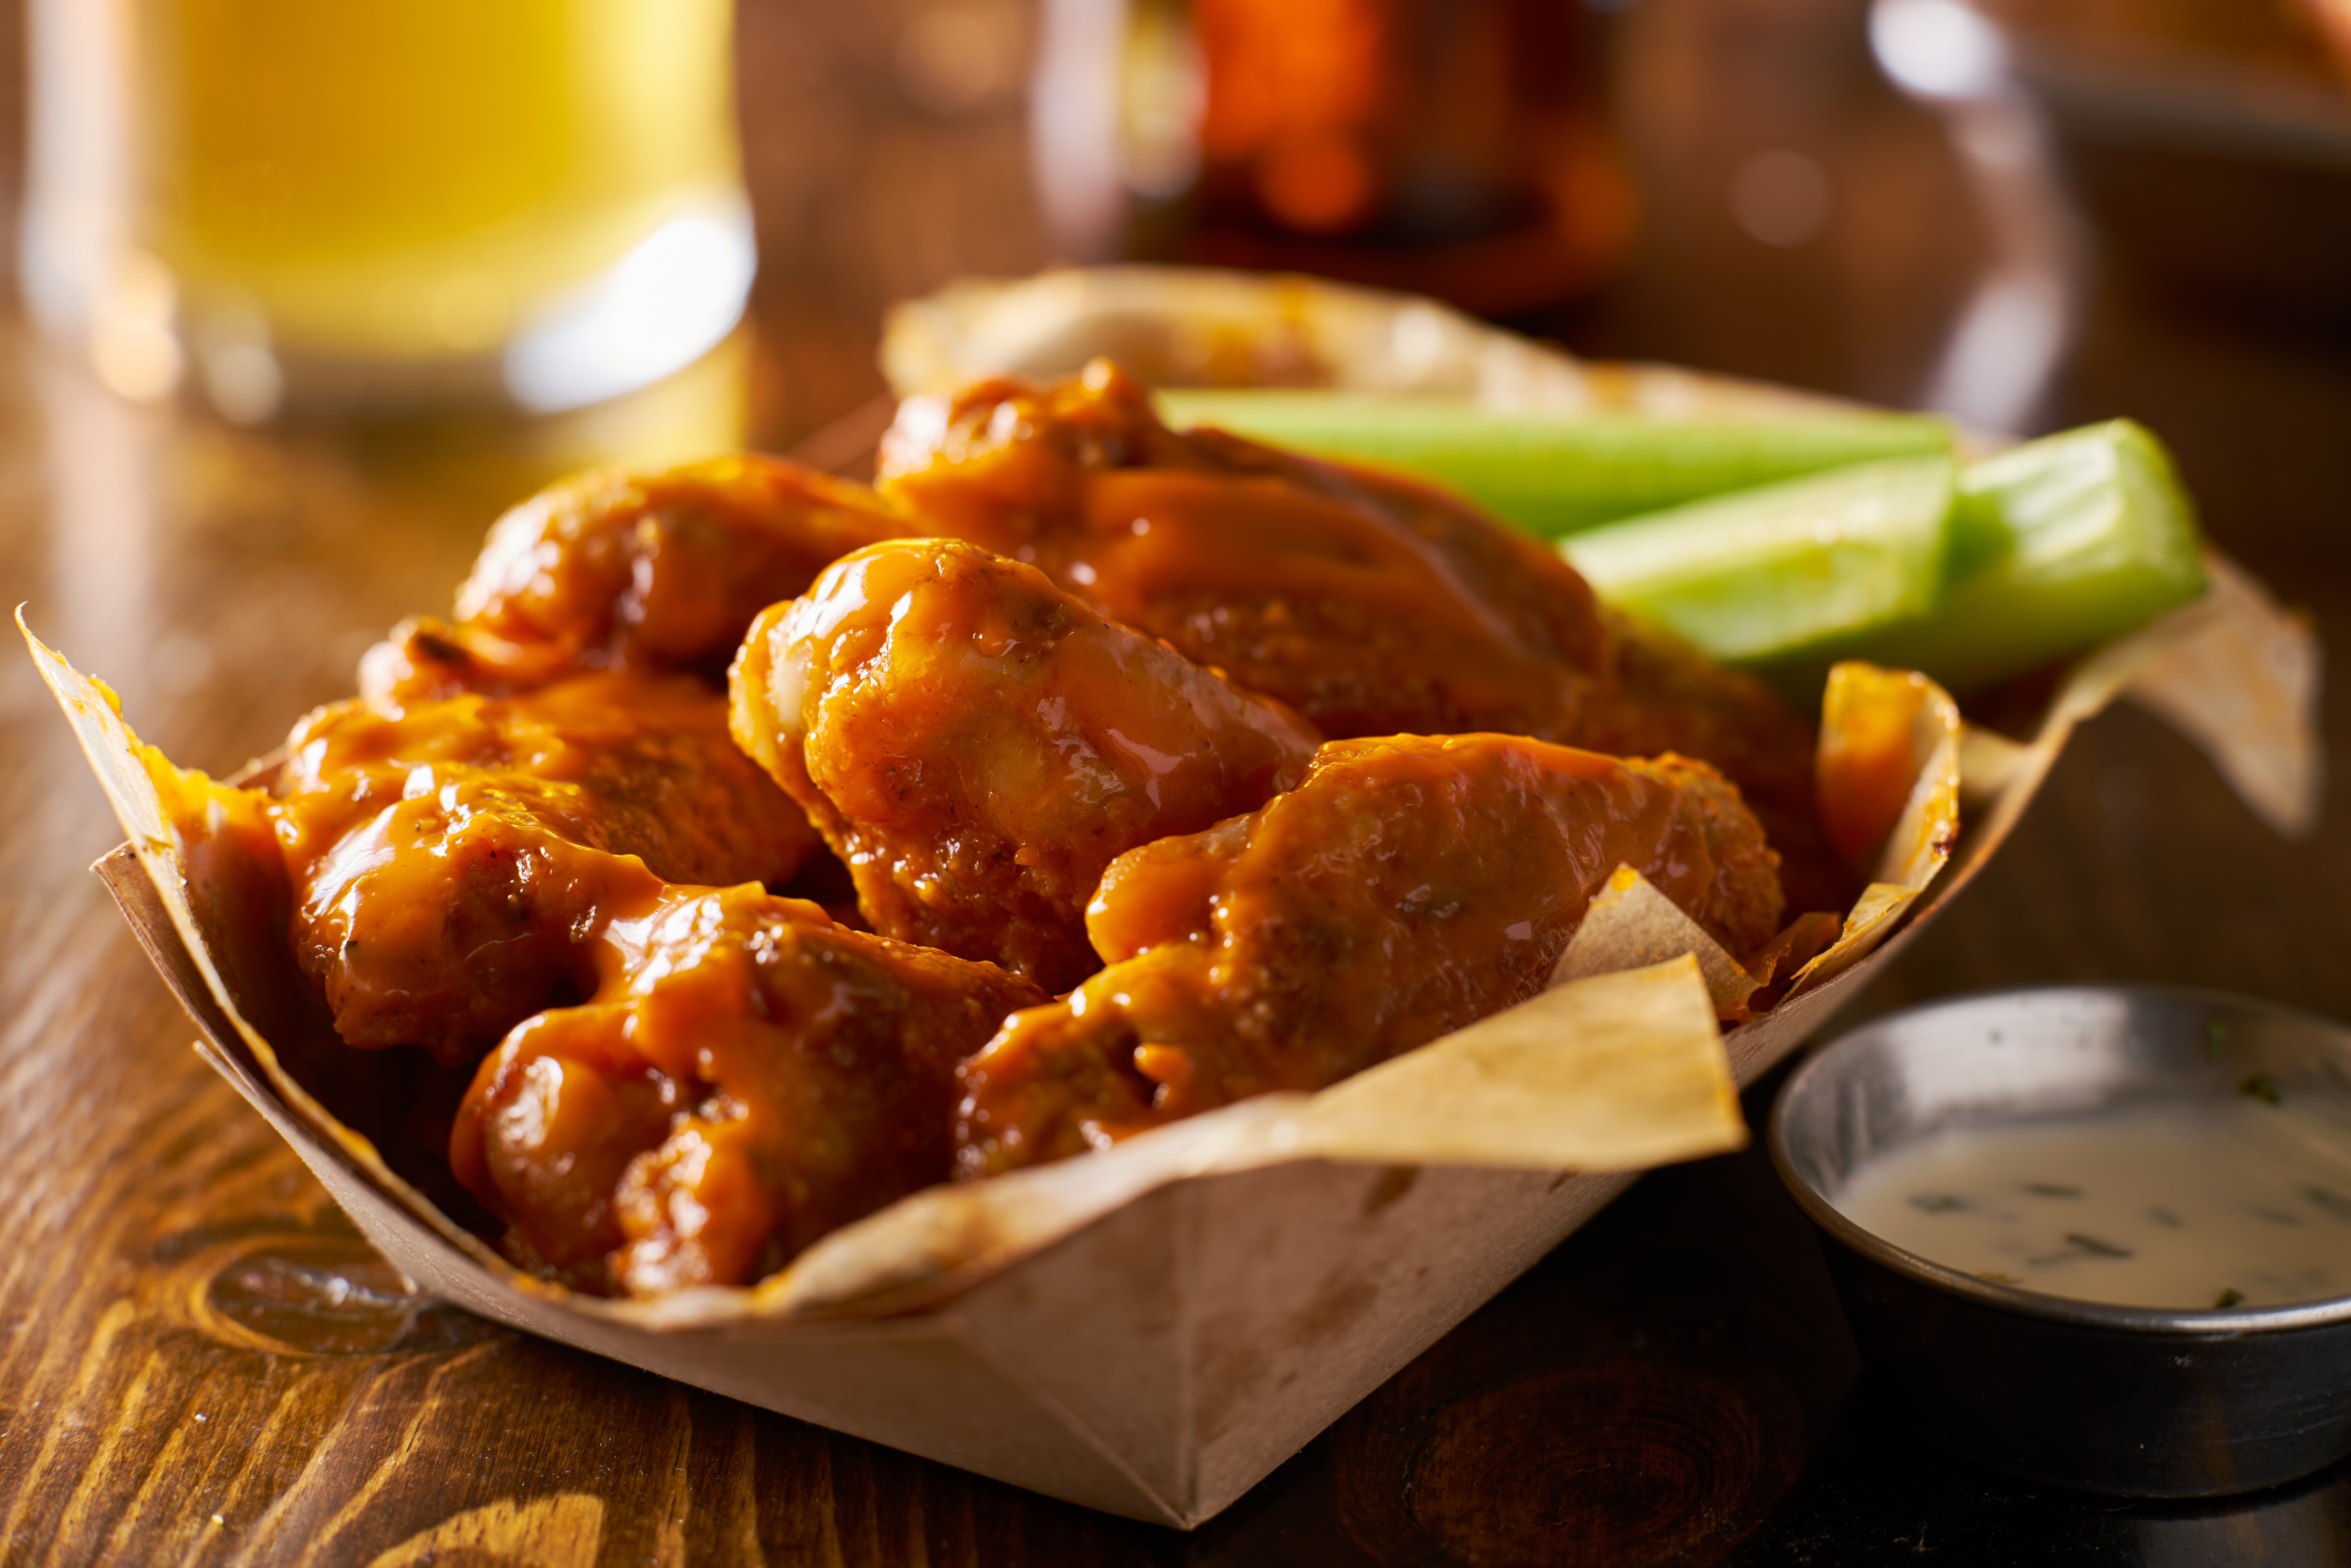 pile of tasty buffalo chicken wings in paper tray with celery and beer